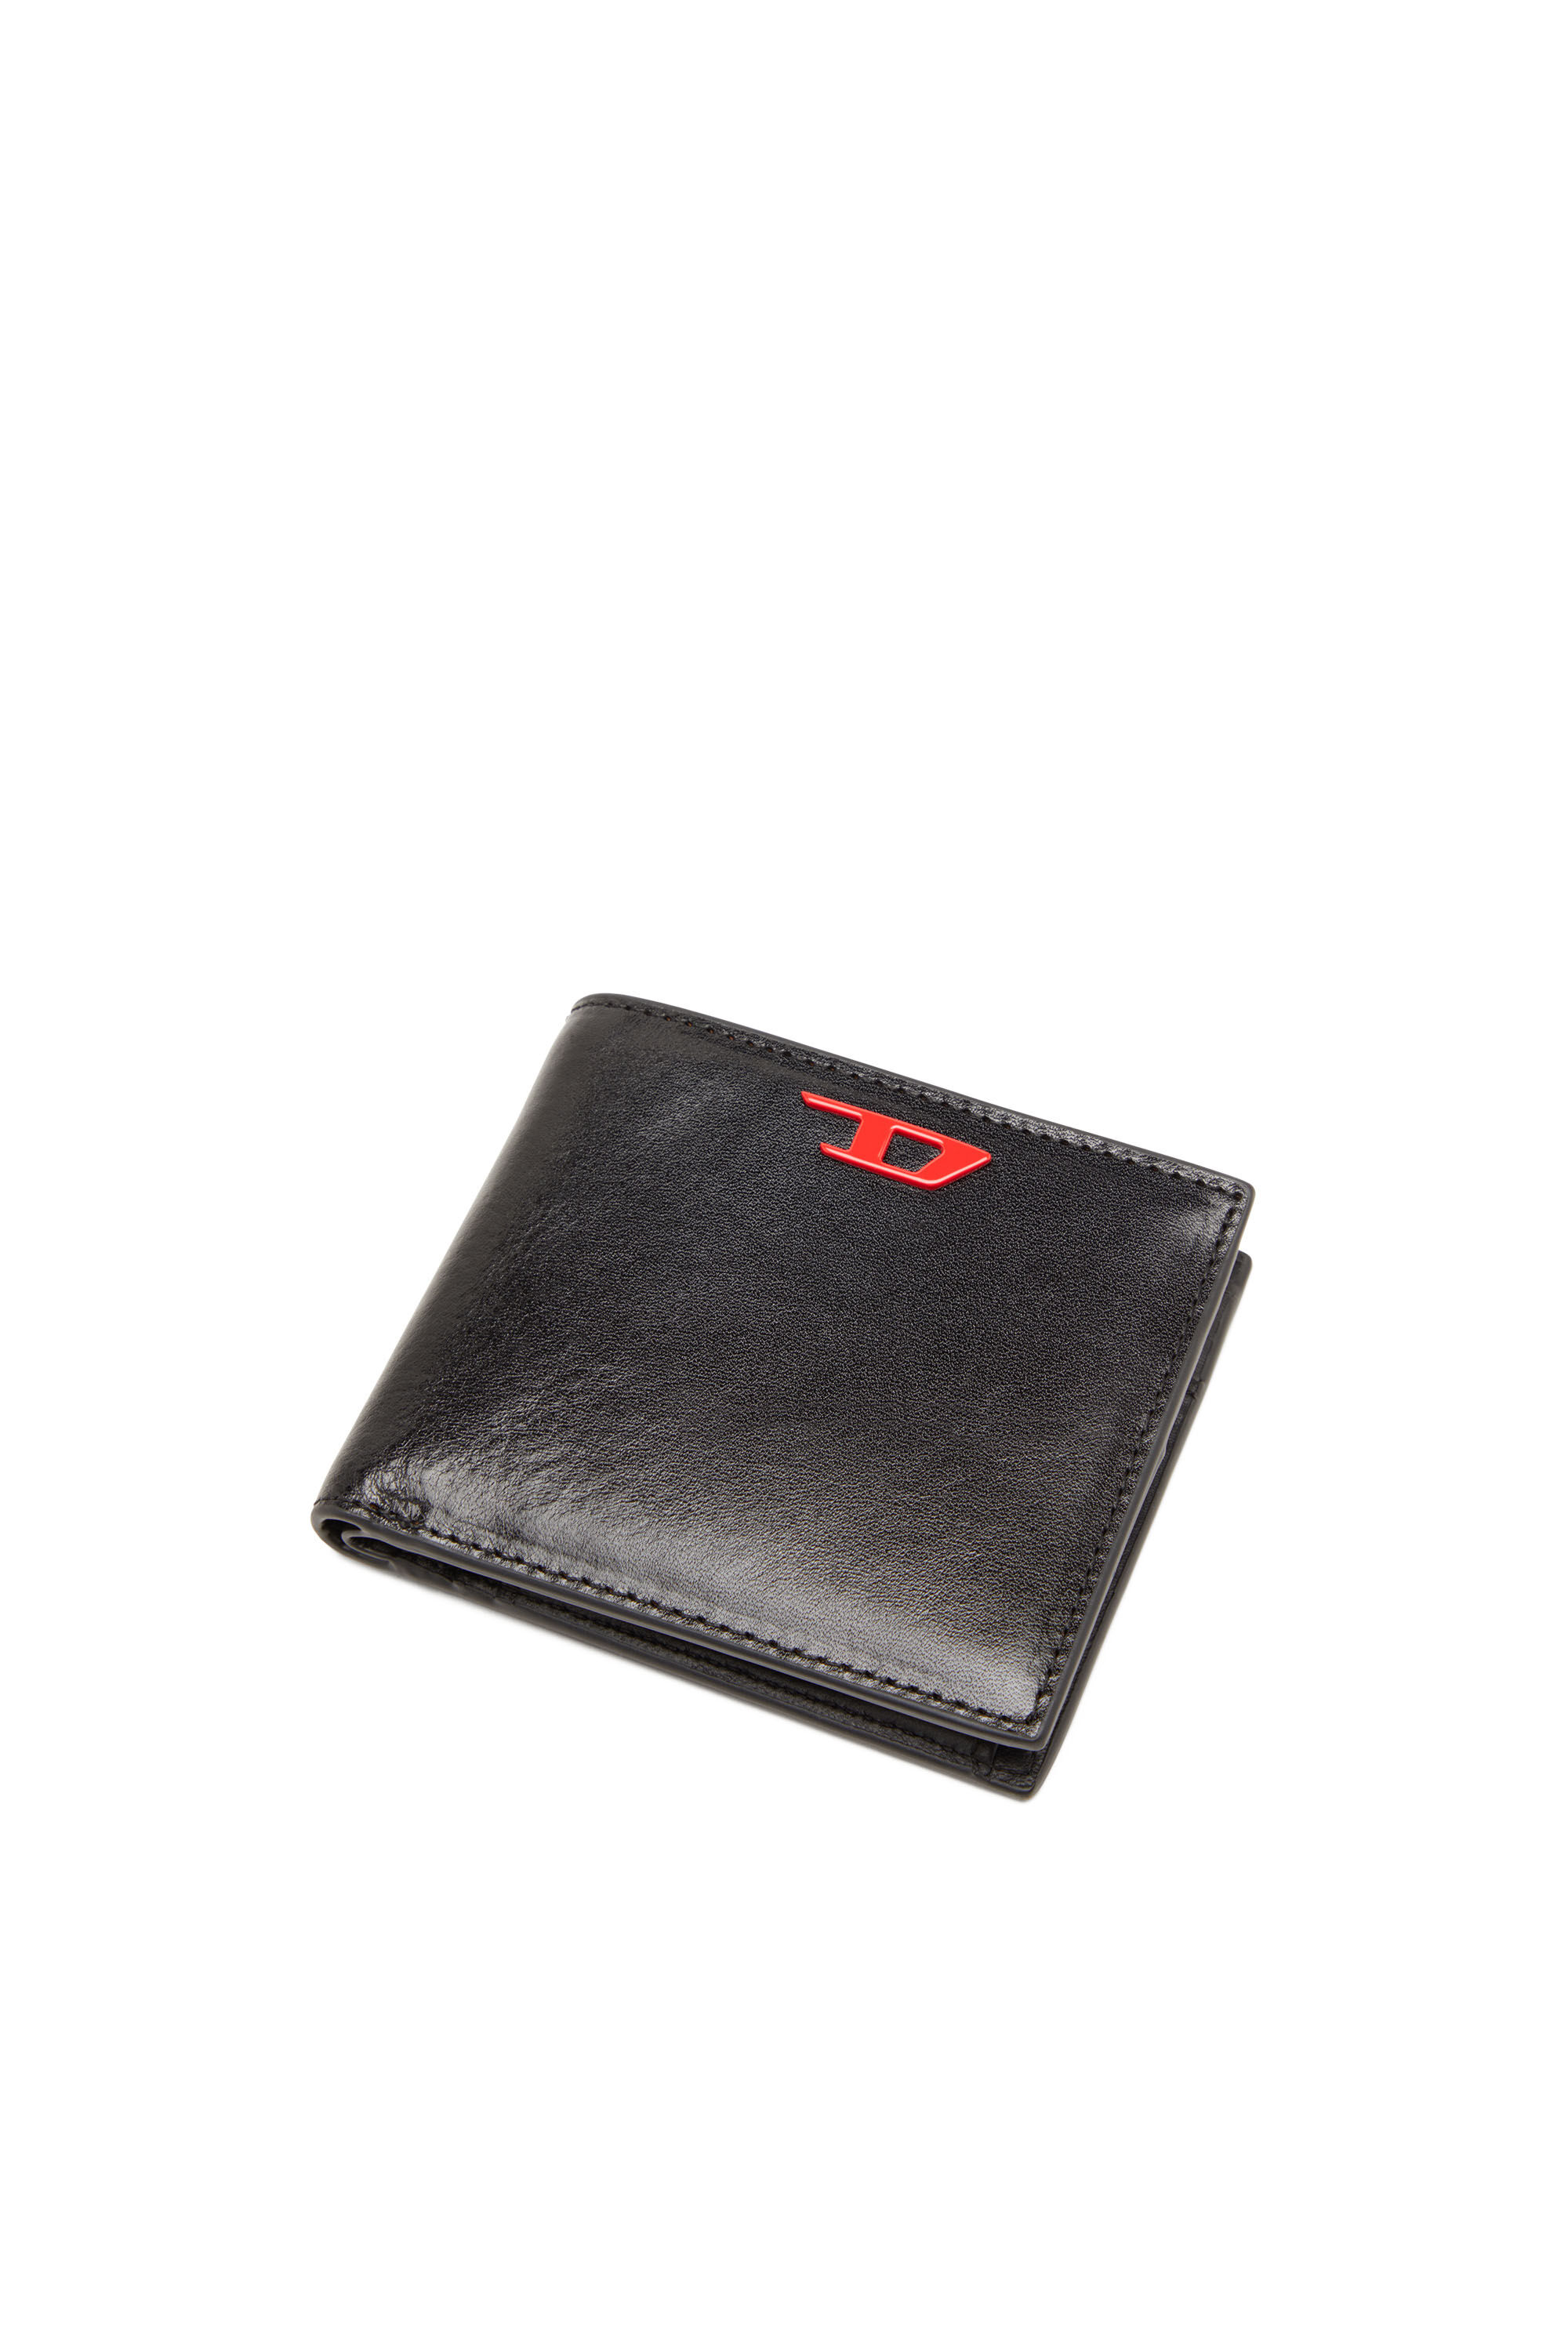 Diesel - RAVE BI-FOLD COIN S, Male Leather bi-fold wallet with red D plaque in ブラック - Image 4